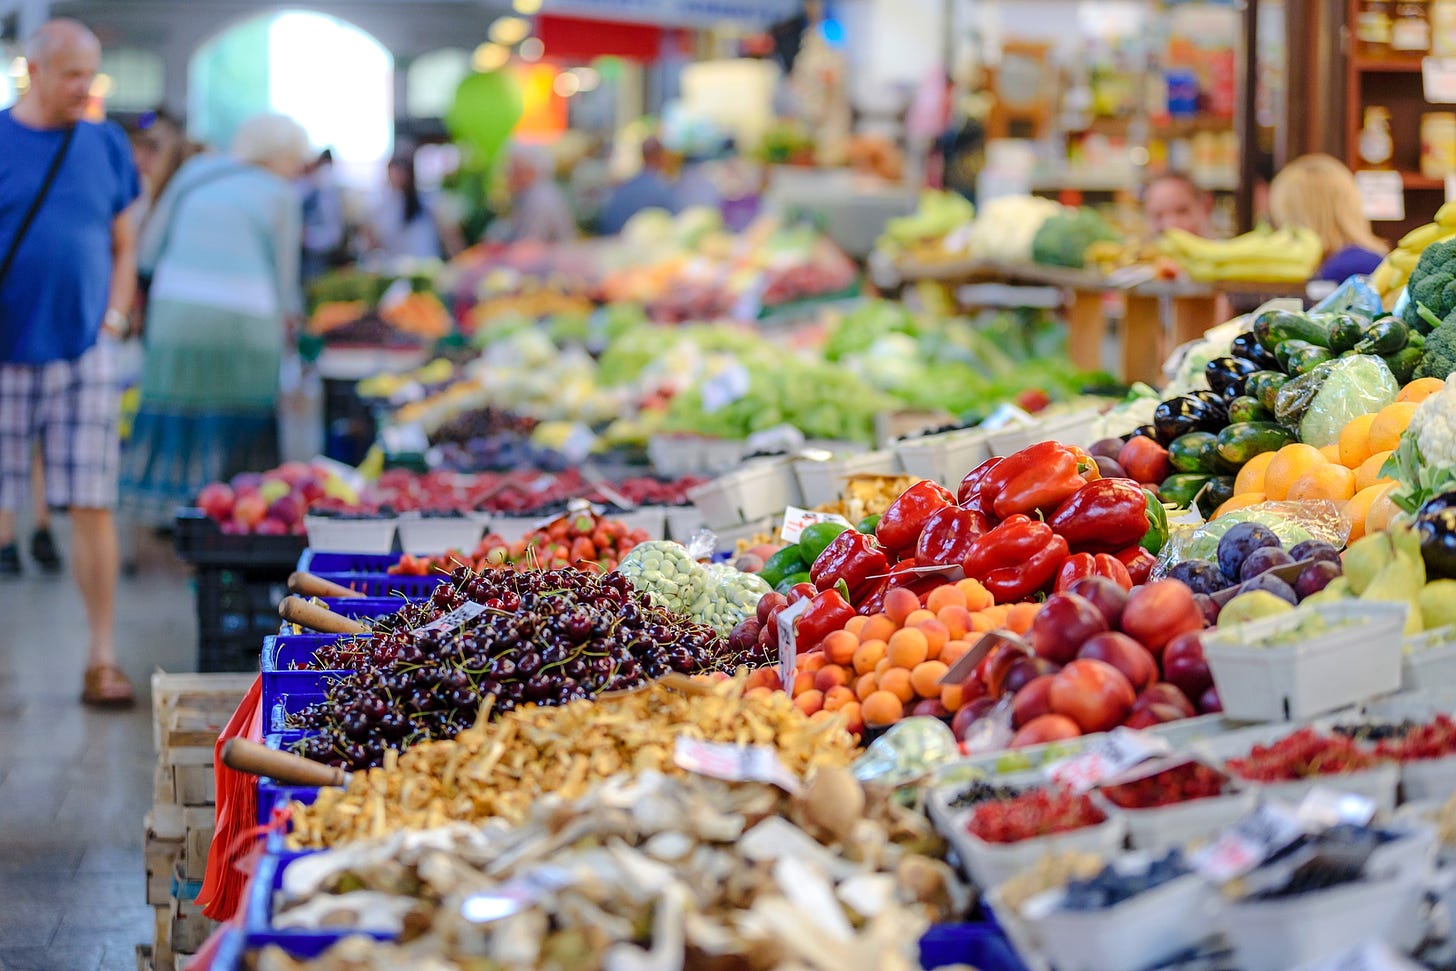 A market stall covered with piles of colorful produce.